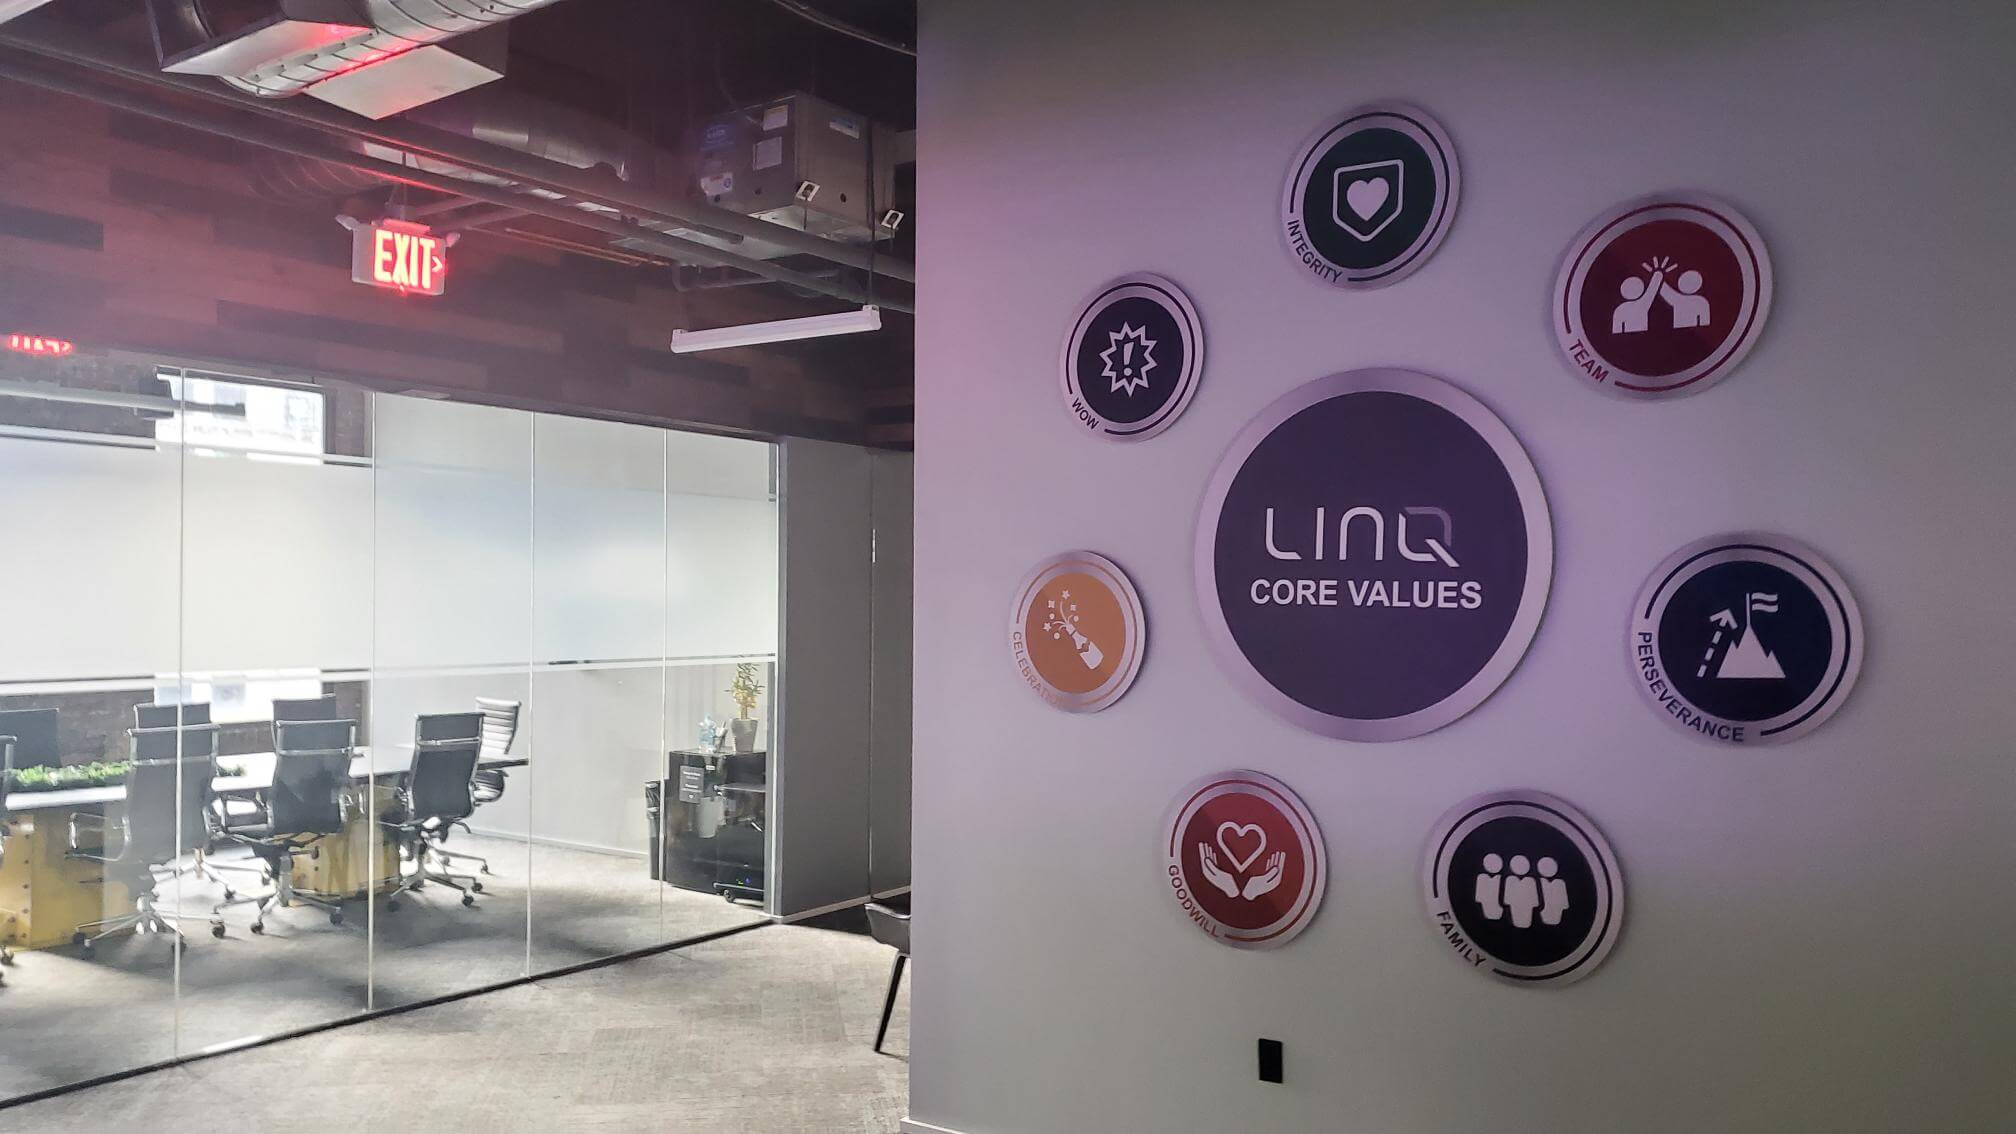 linq core values posted on the wall